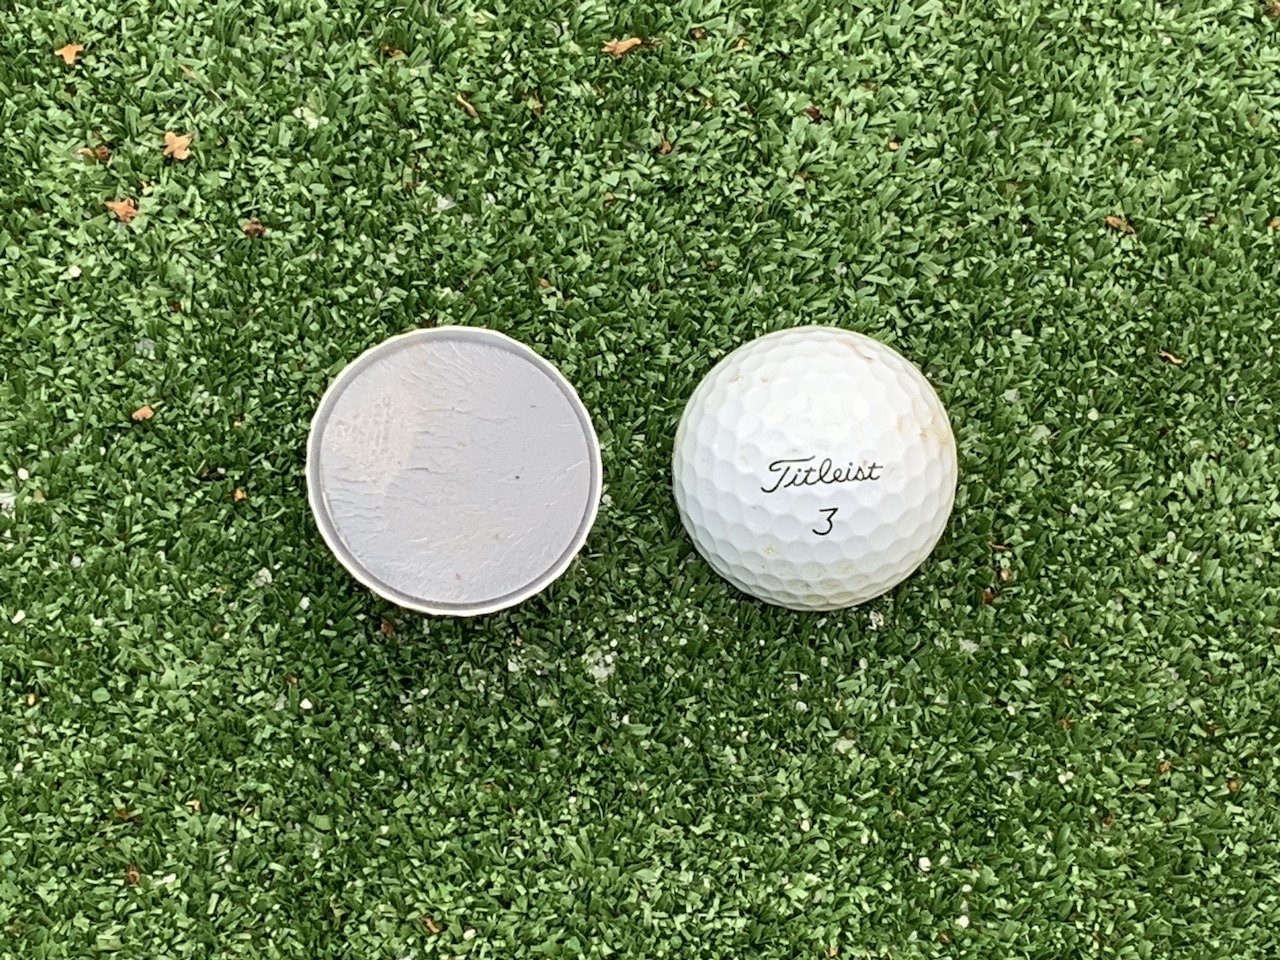 What Is Inside a Golf Ball? The Mystery and History Uncovered | Golflink.com